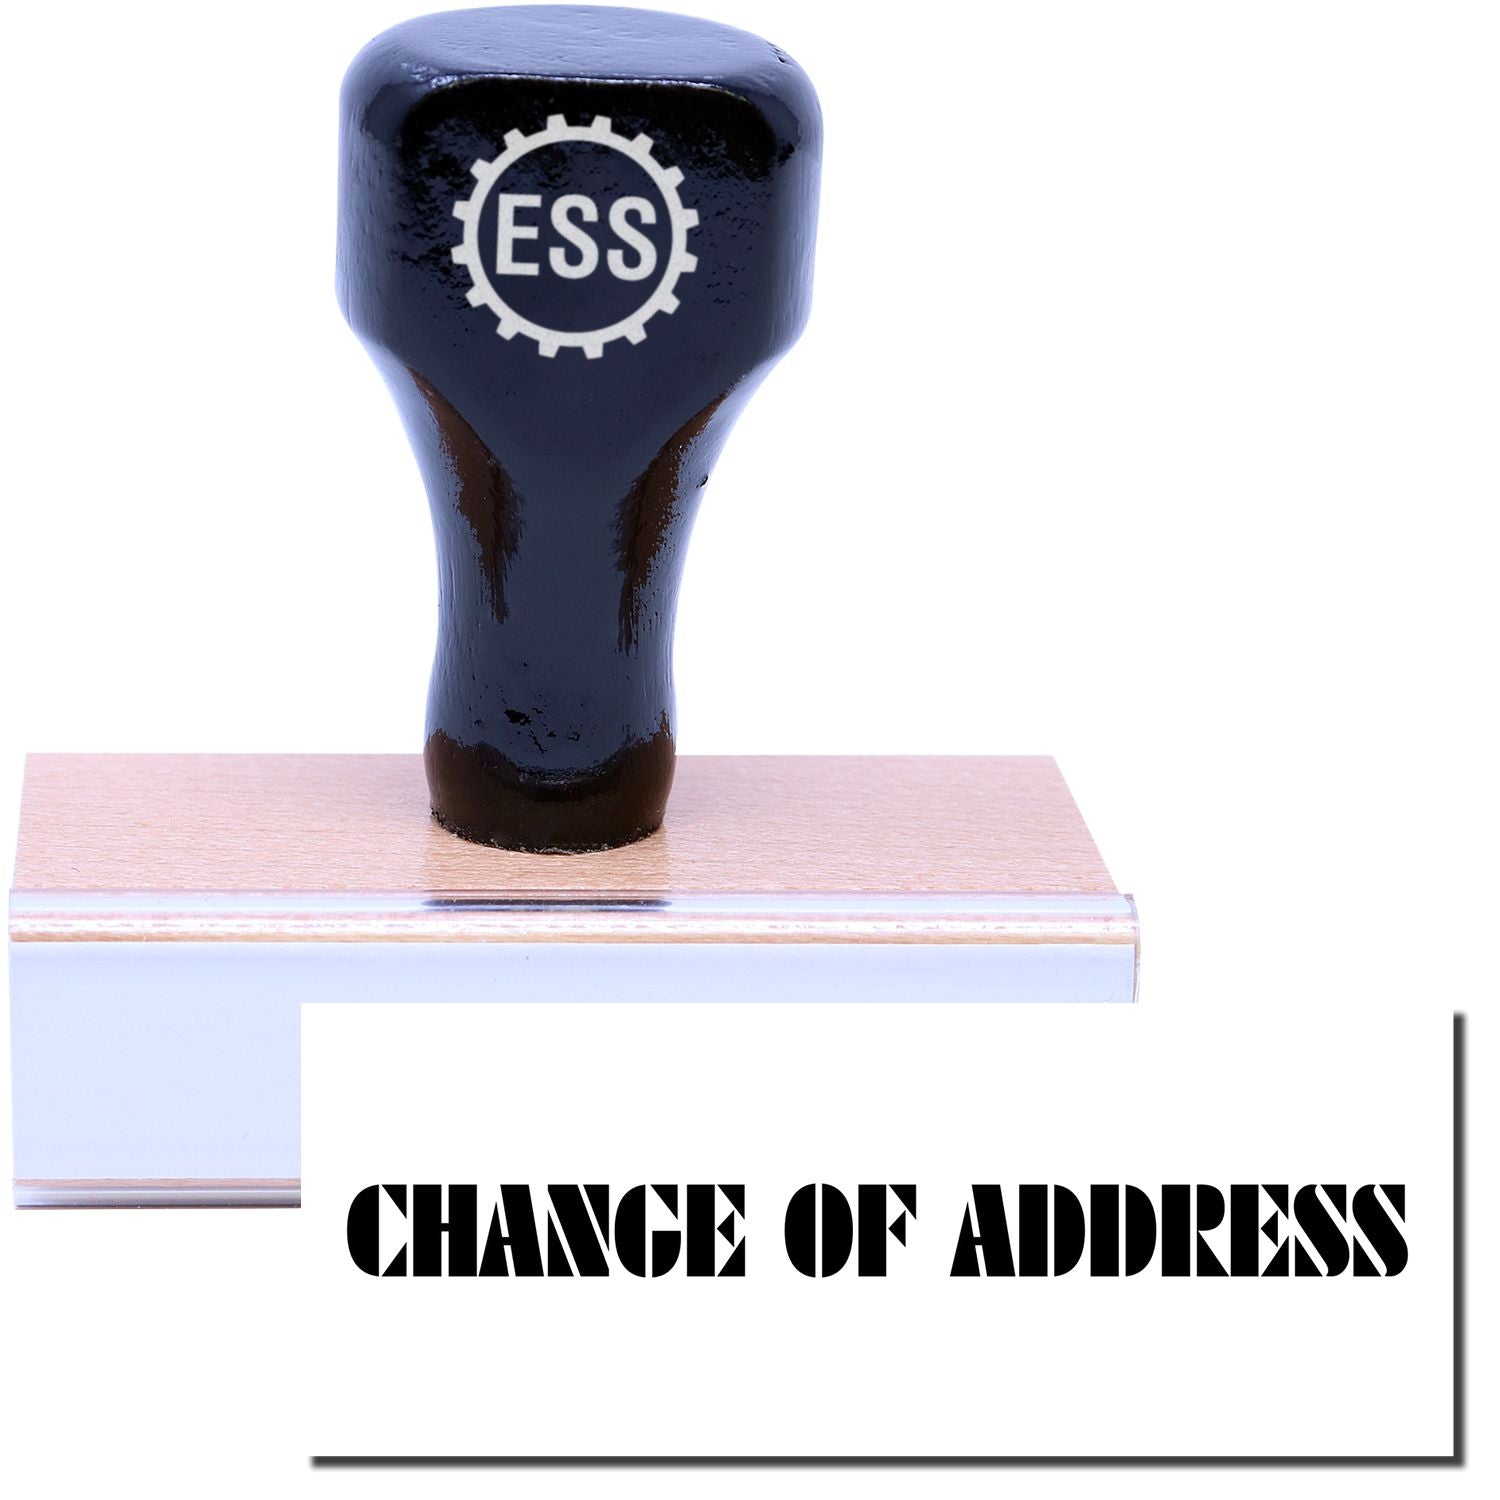 A stock office rubber stamp with a stamped image showing how the text "CHANGE OF ADDRESS" is displayed after stamping.